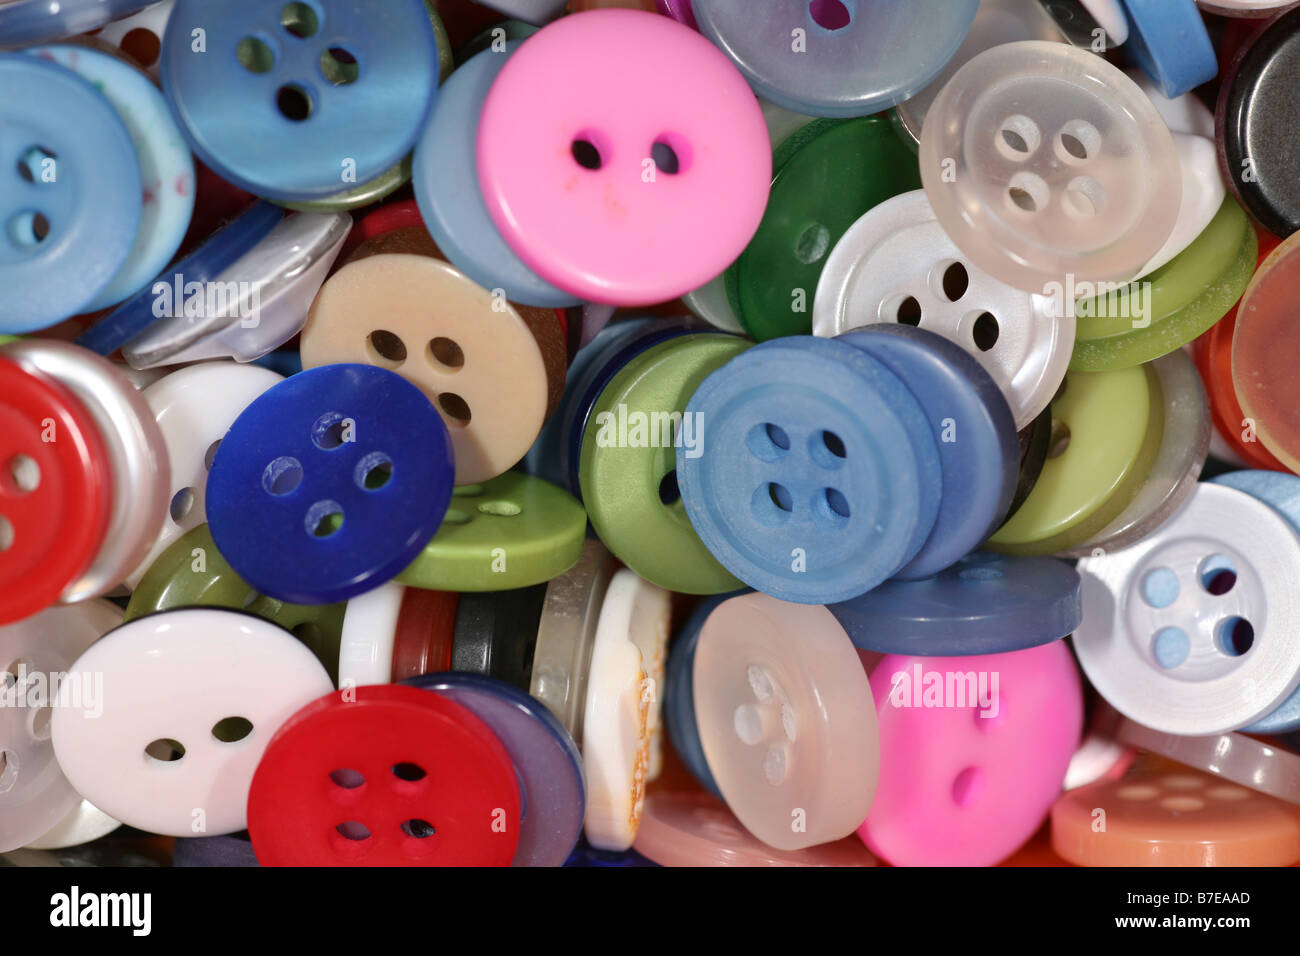 Colorful Buttons Stock Photo 319752386